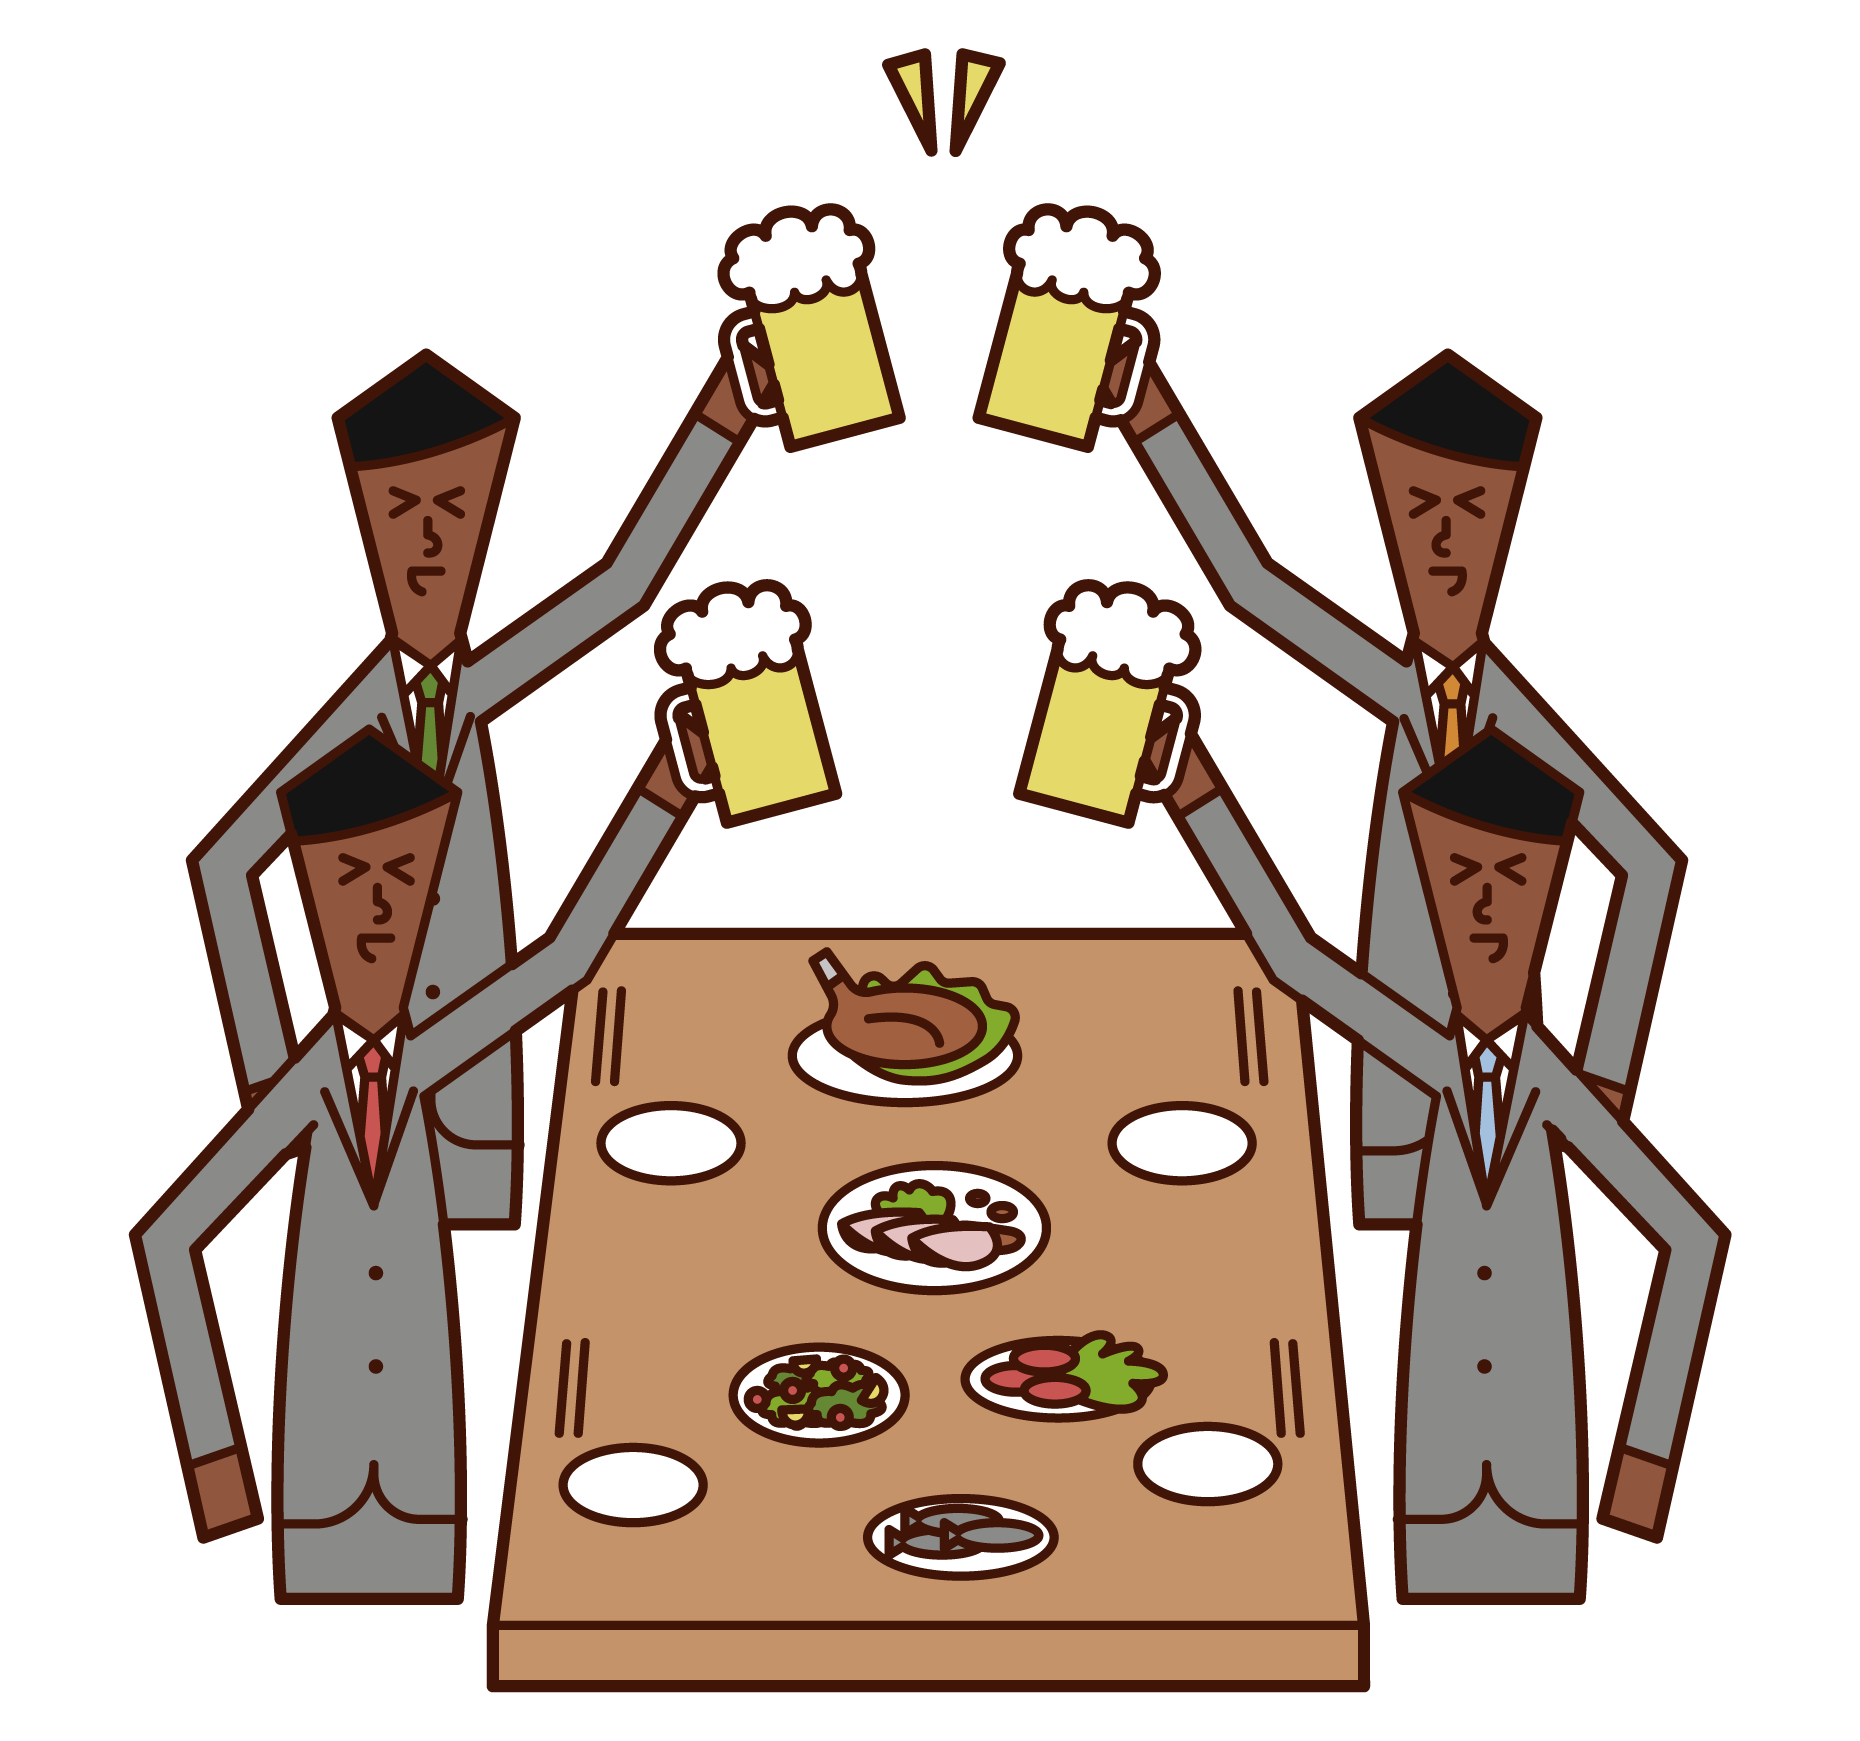 Illustration of people (men) toasting at a drinking party